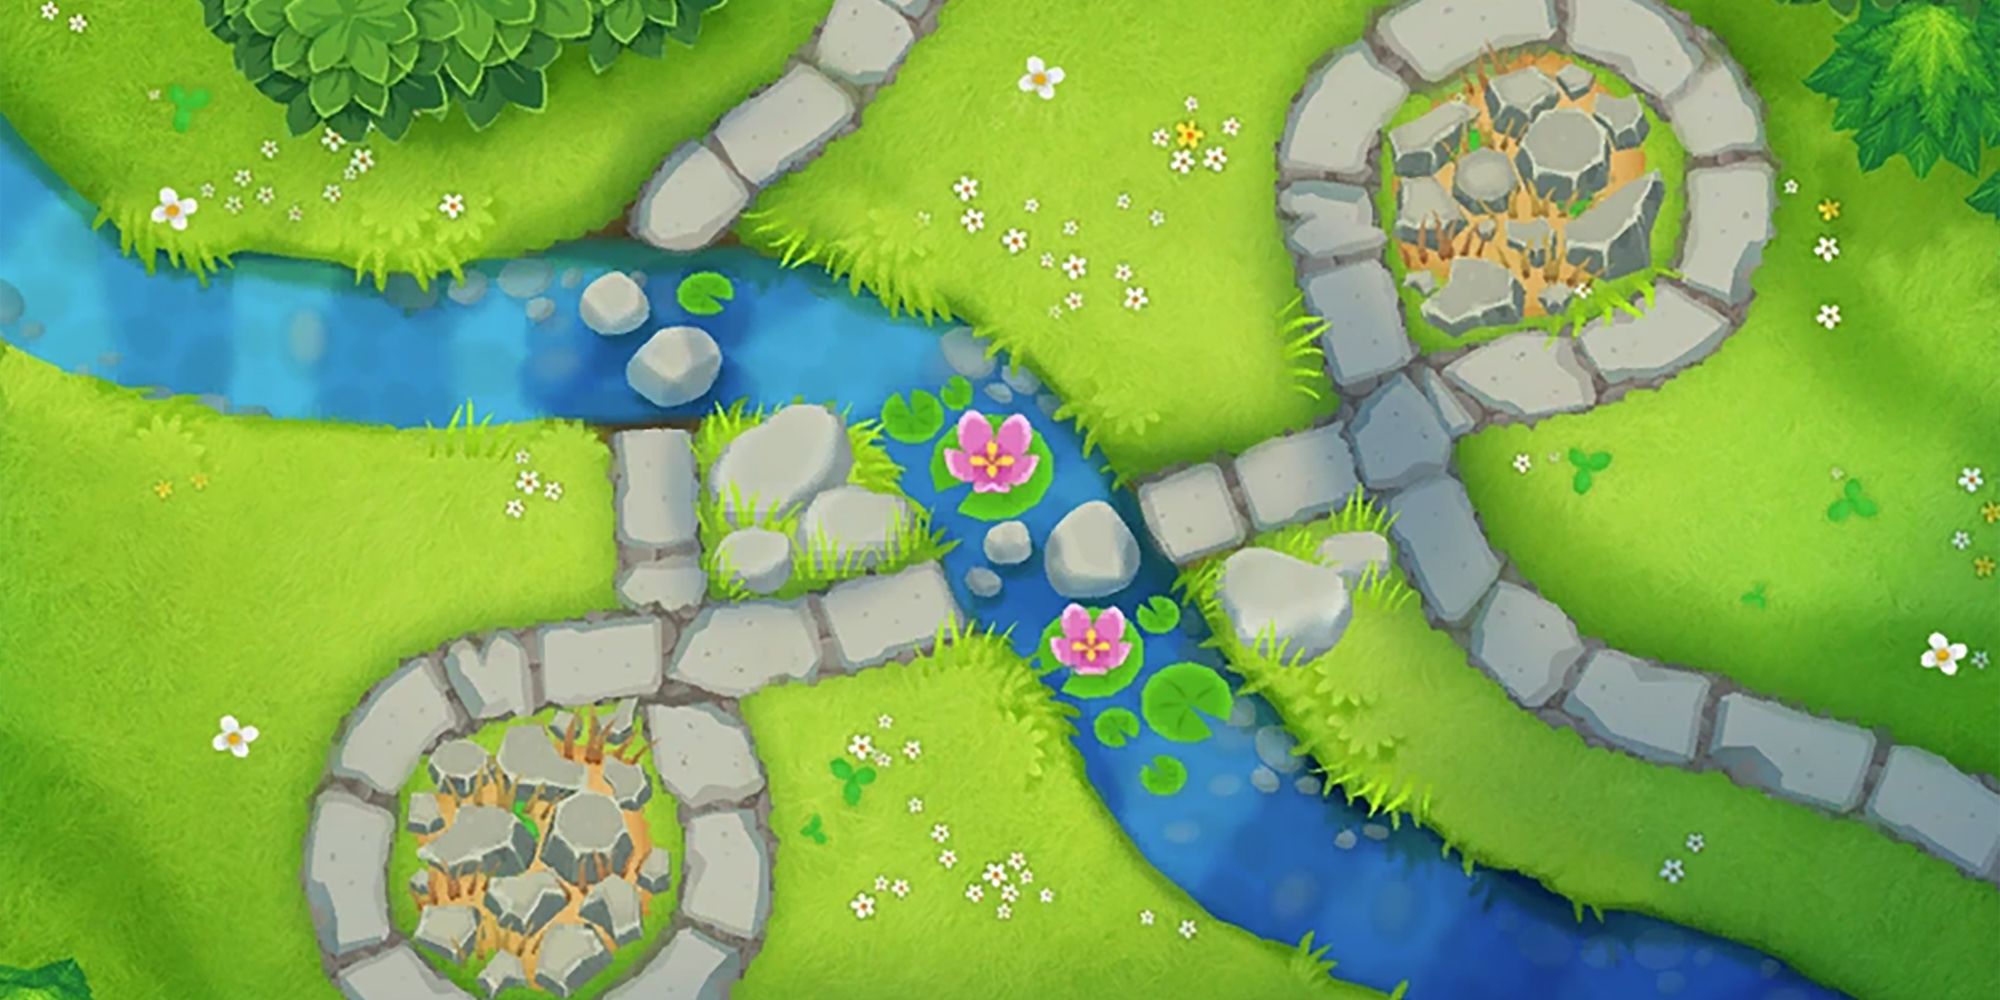 Bloons TD 6 downstream